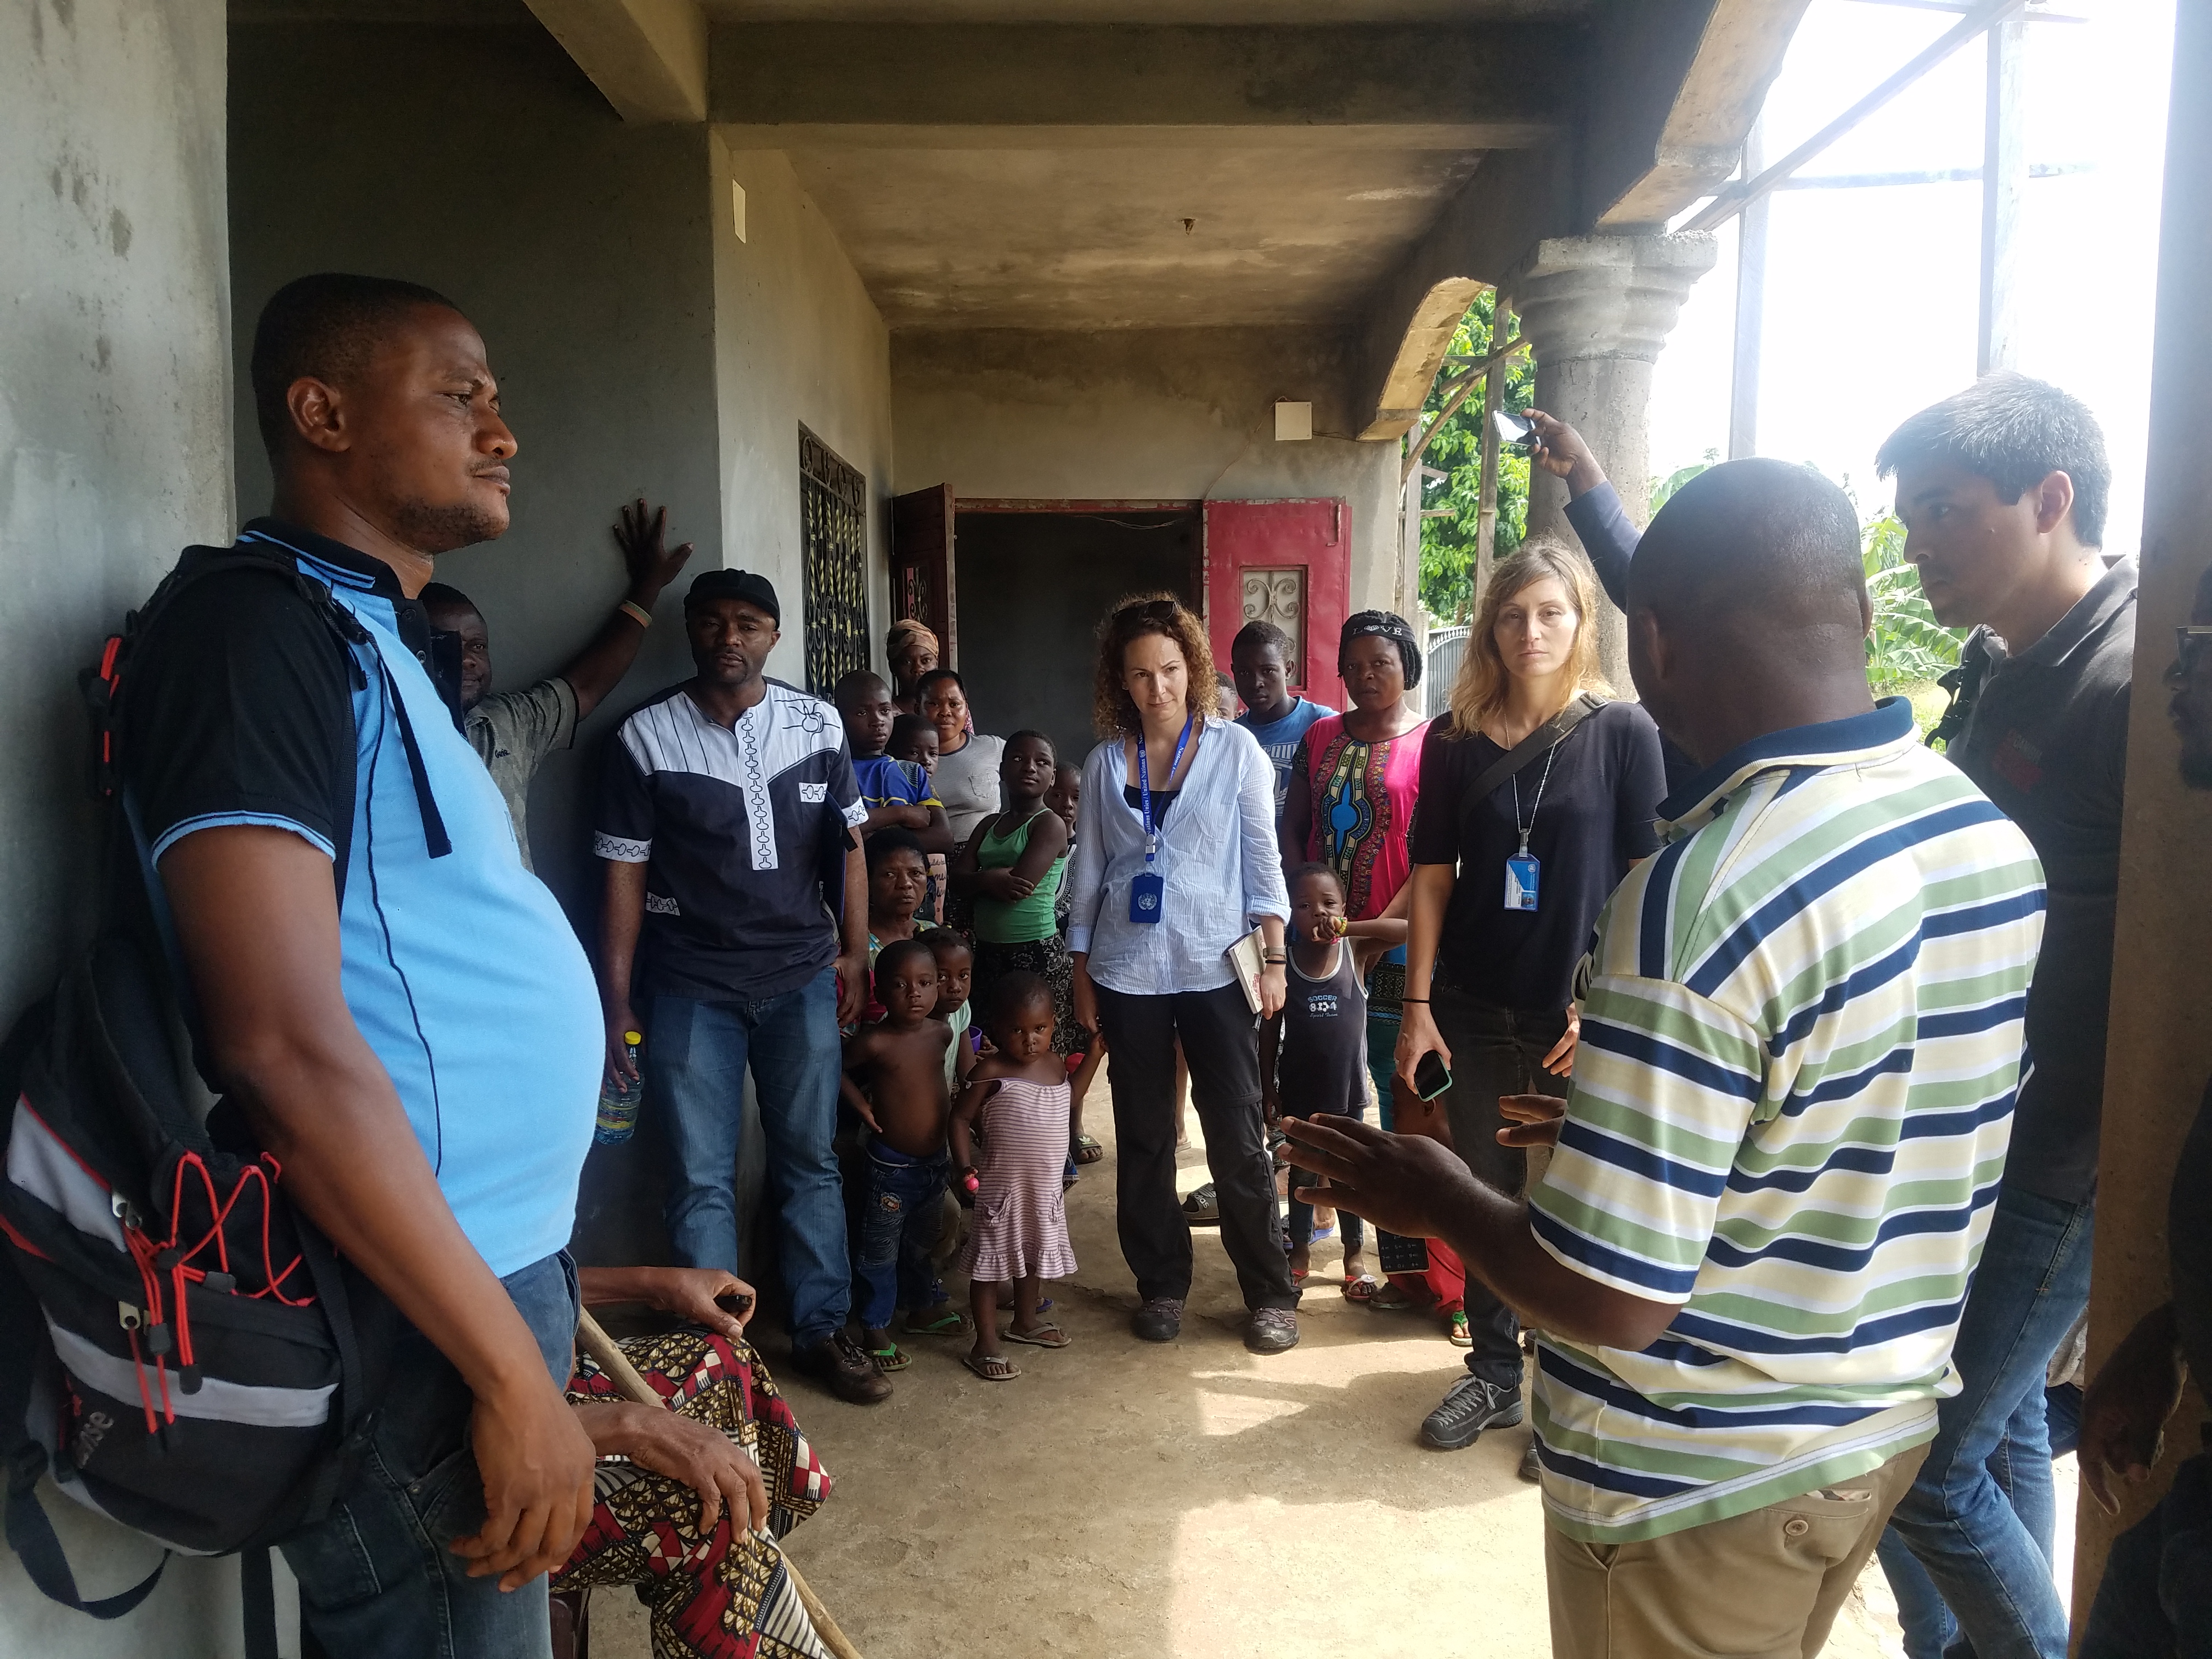 IYEC AND PARTNERS OF THE UNHCR AND DANISH REFUGEE COUNCIL ON A FIELD VISIT FOR INTERNALLY DISPLACE PERSONS (IDP) IN LIMBE MUNICIPALITY